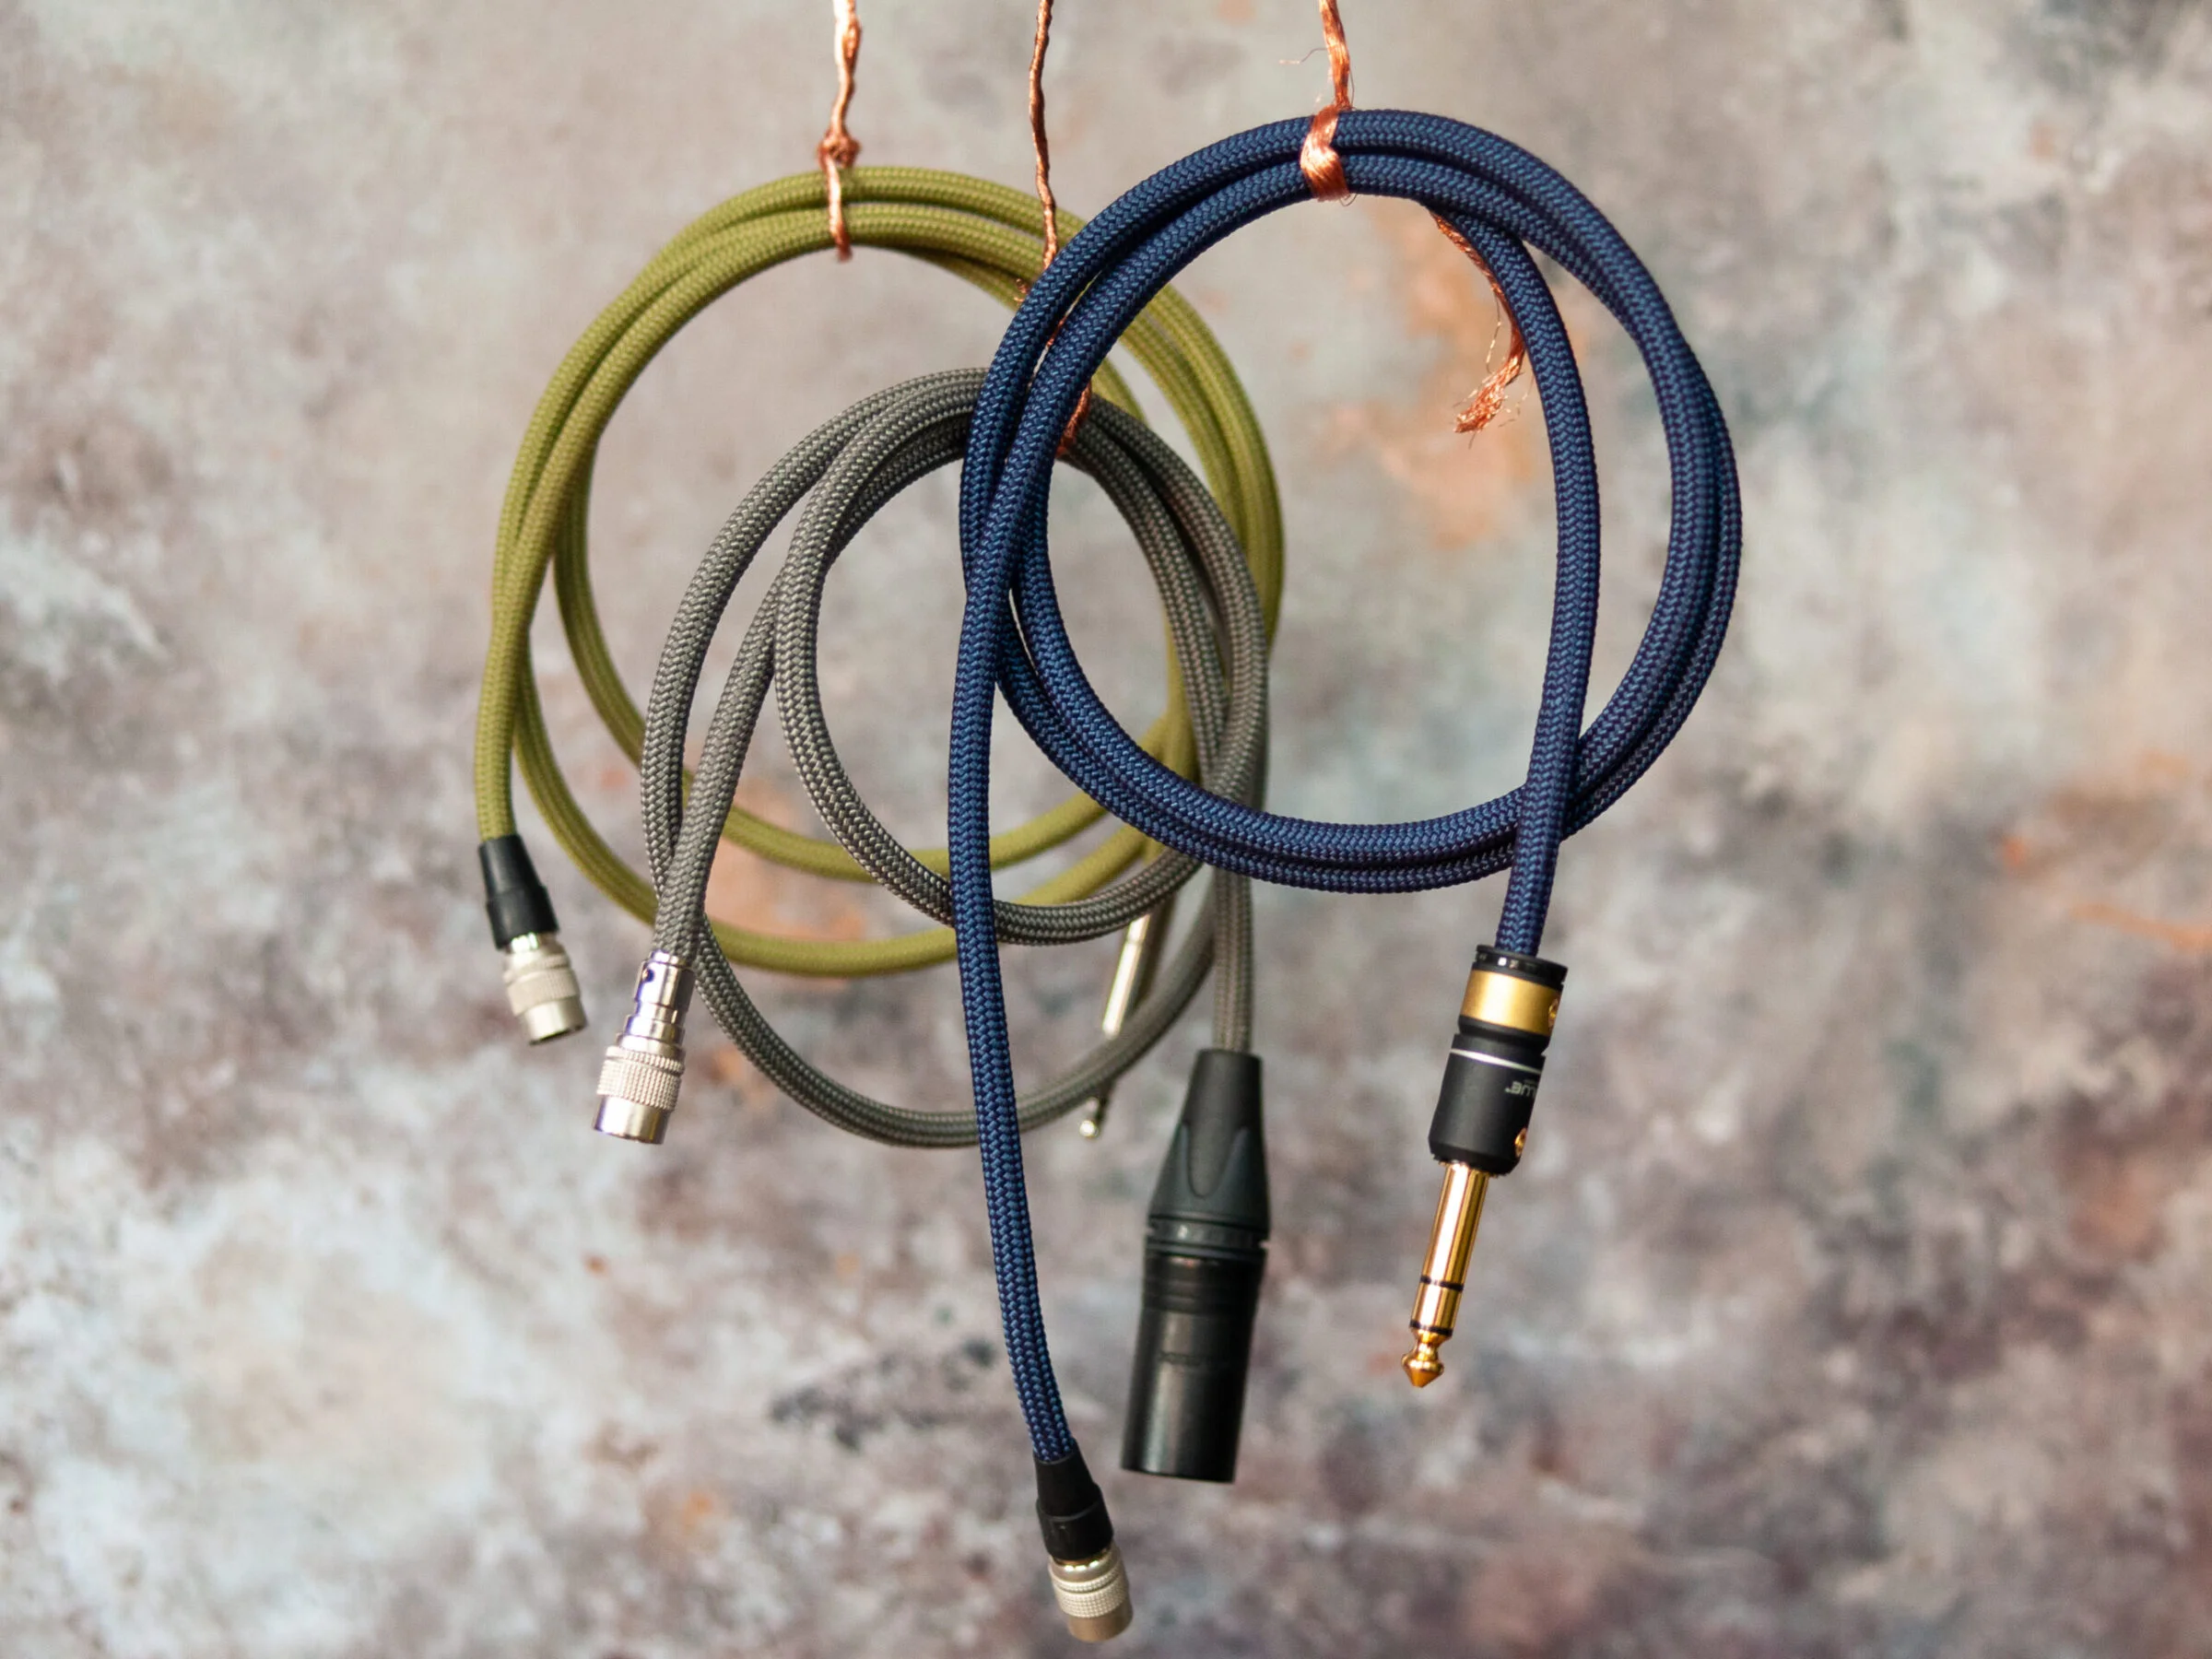 Core Cable, part of the re:cxnnected series of modular cables from Cxnnected. Pairs with Y-Split cable to form a complete headphone cable.